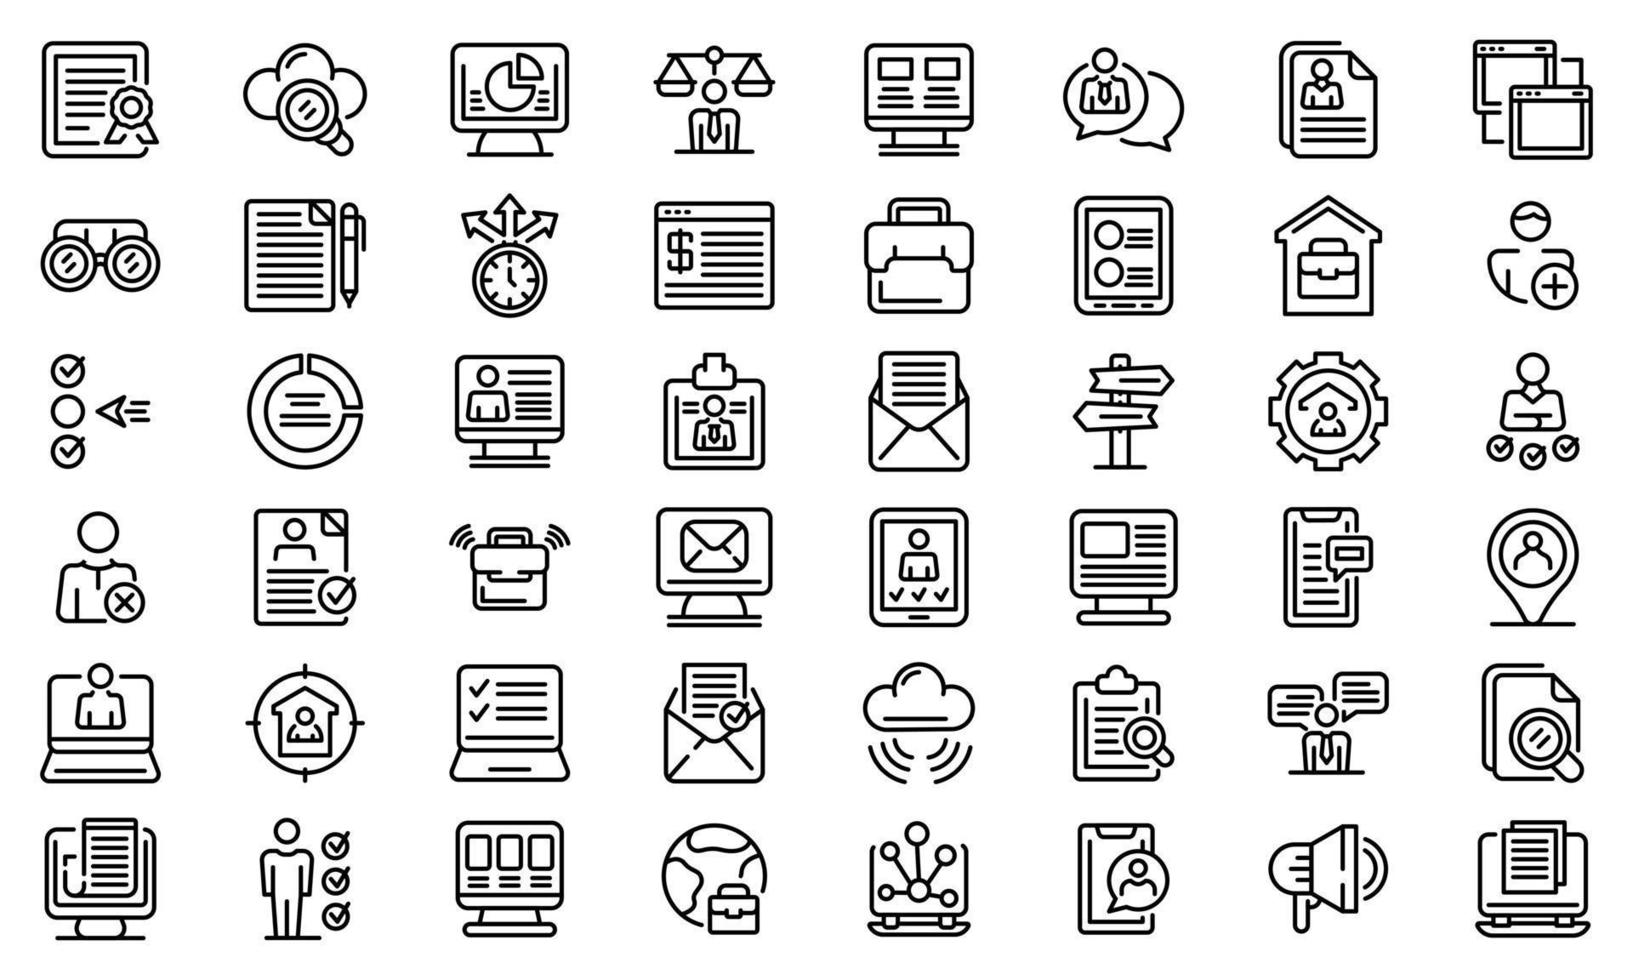 Online job search icons set, outline style vector